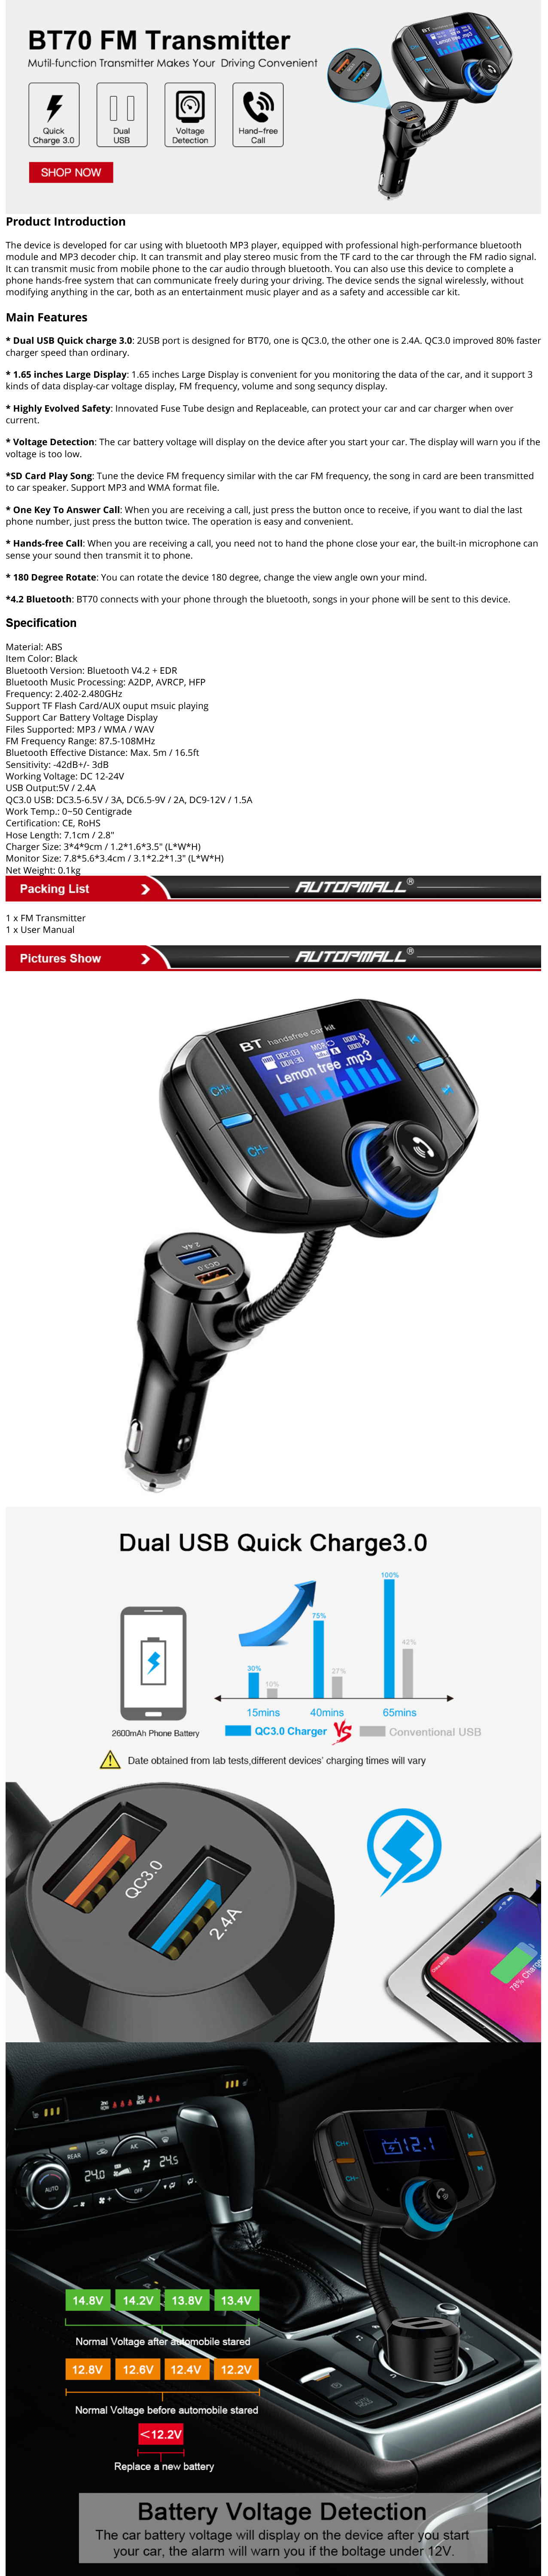 LUOM (Upgraded Version) Bluetooth FM Transmitter, Wireless Radio Adapter  Hands-Free Car Kit with 1.7 Inch Display, QC3.0 and Smart 2.4A Dual USB  Ports, AUX Input/Output, TF Card Mp3 Player Car Electronics Accessories